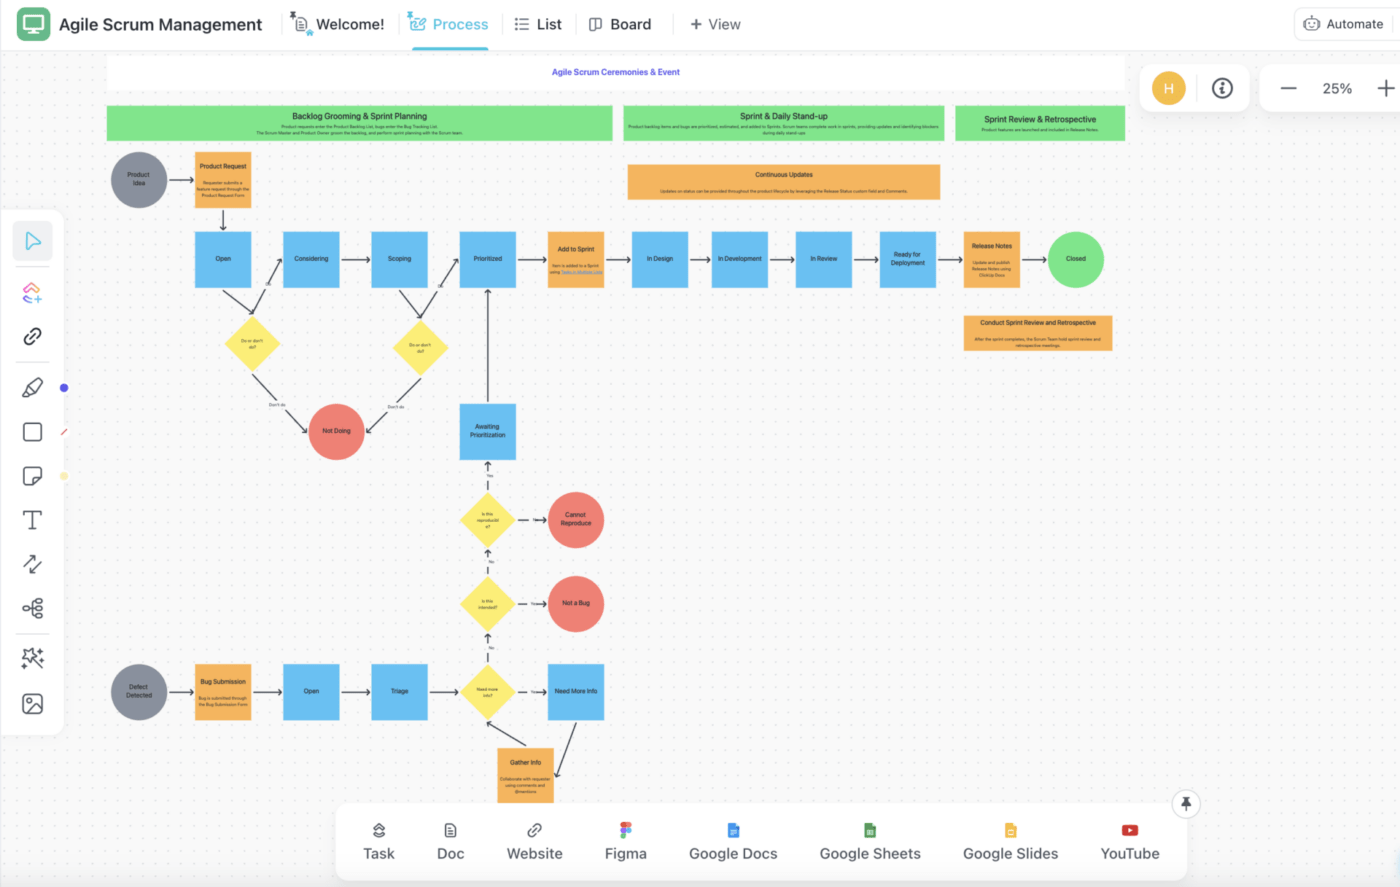 Agile Scrum Project Management Template by ClickUp